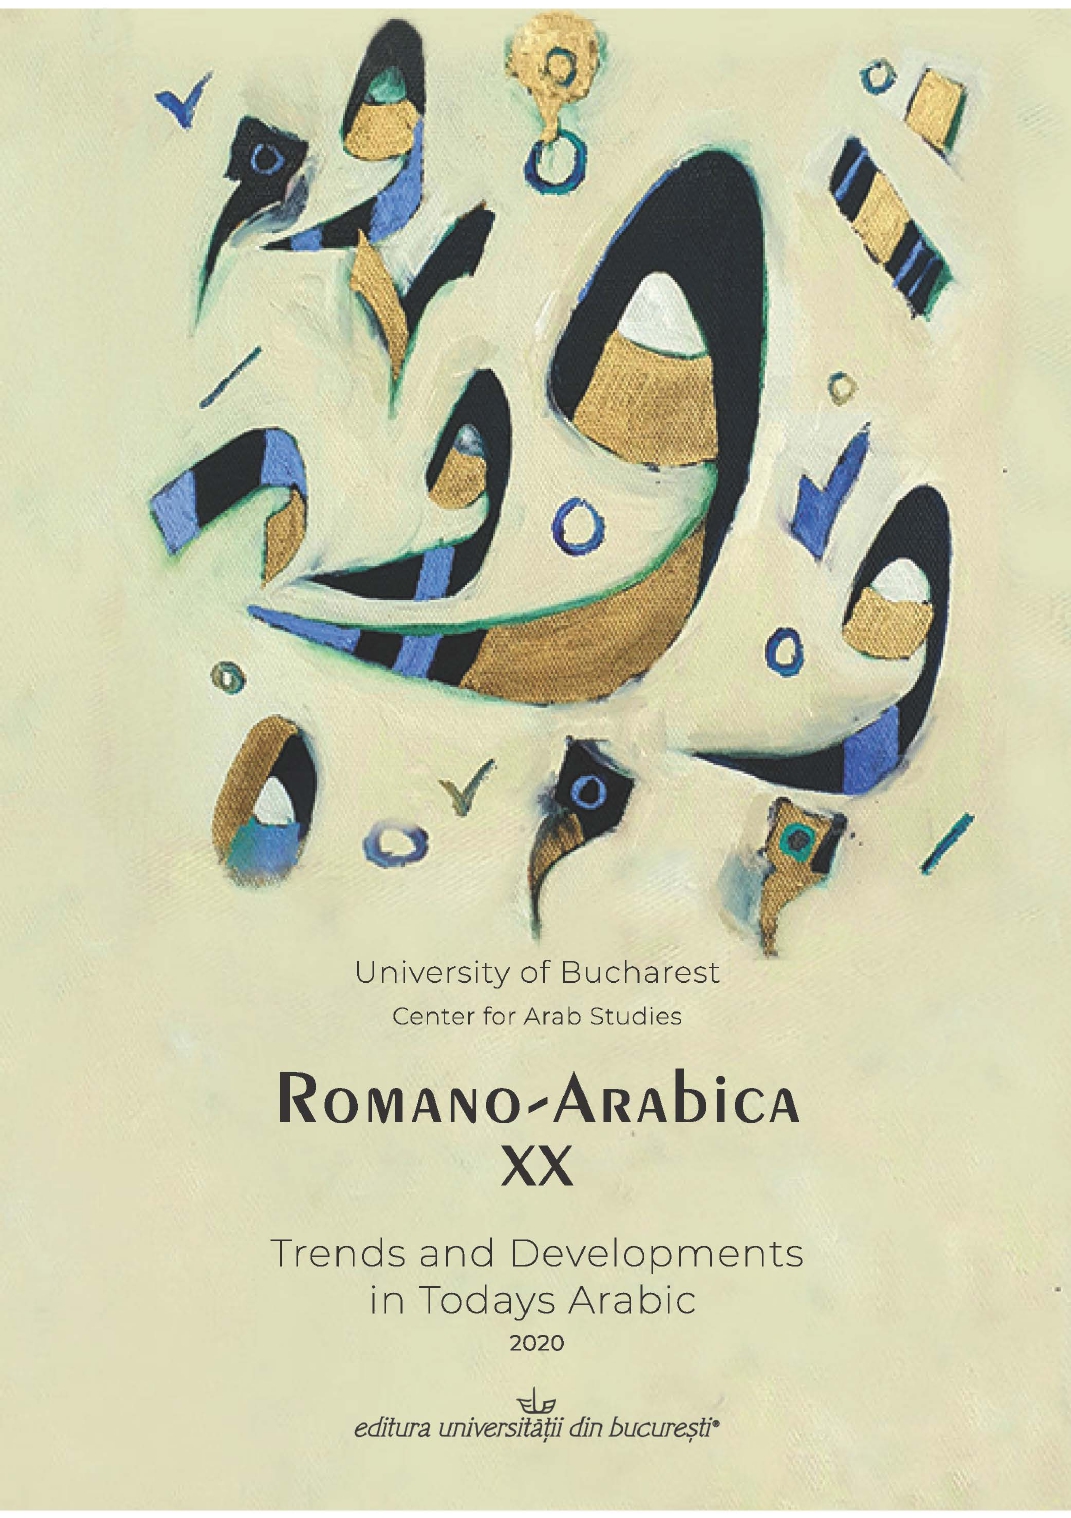 THE ENIGMATIC LANGUAGE AND THE OXYMORONIC ABSENTRELATIONSHIPS IN THE POETRY OF SAMĪḤ AL-QĀSIM AND MAḤMŪD DARWĪŠ Cover Image